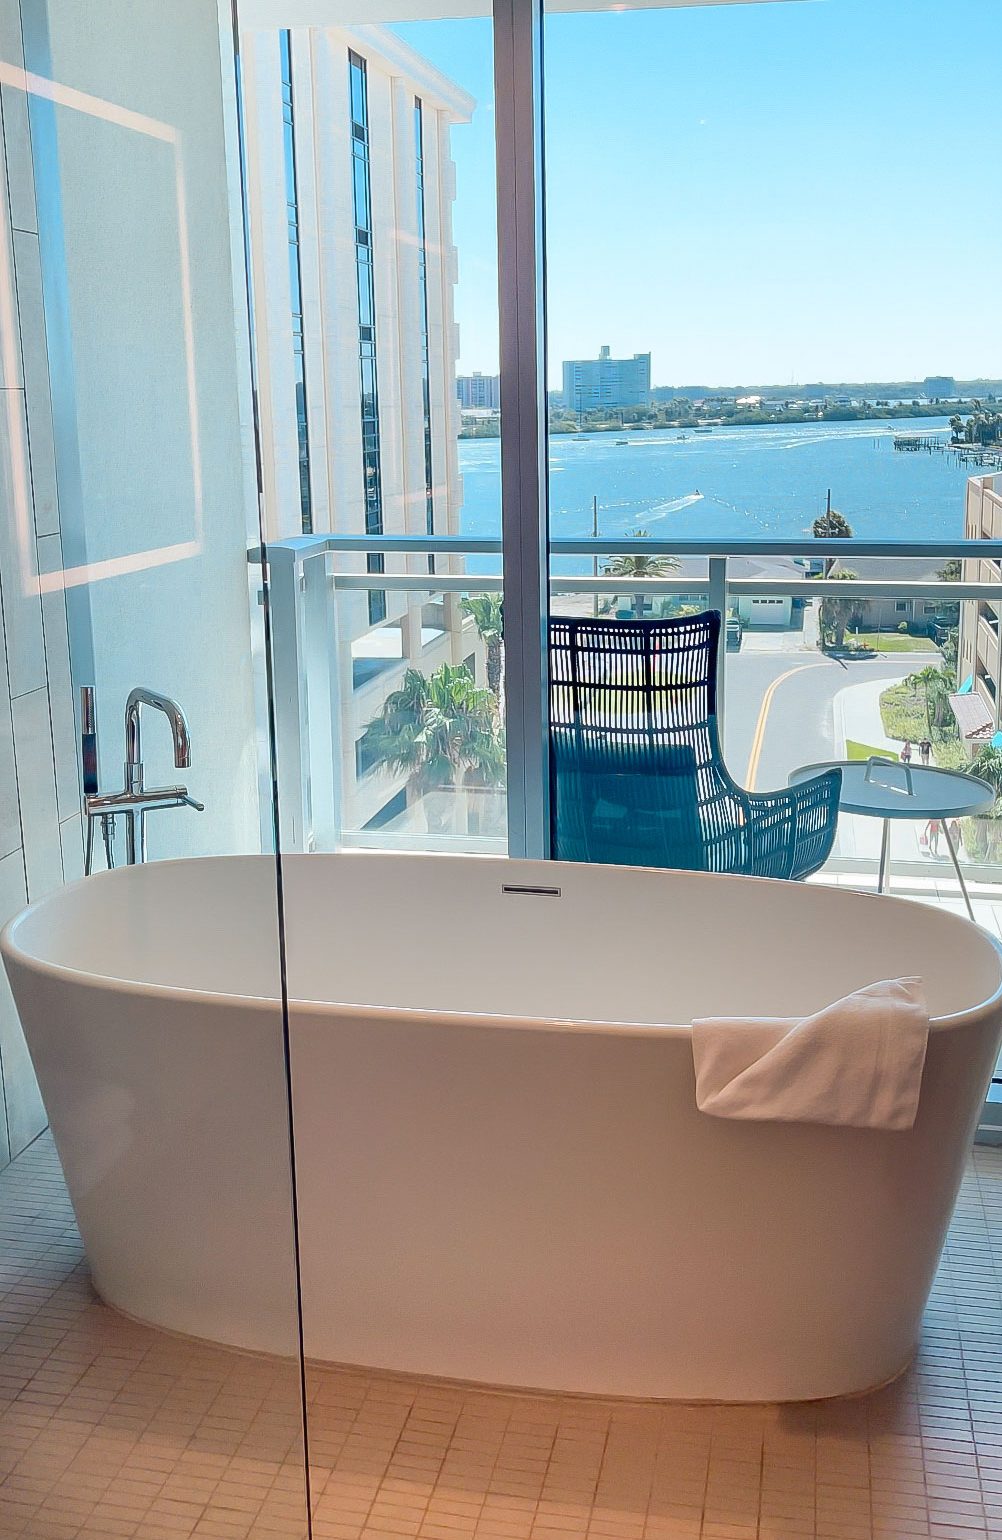 Florida Blogger, The Lovely Flamingo shares a photo of the Wyndham Grand Clearwater Beach Presidential Suite Bathroom with a soaking tub overlooking the inter coastal waters of Clearwater Beach.